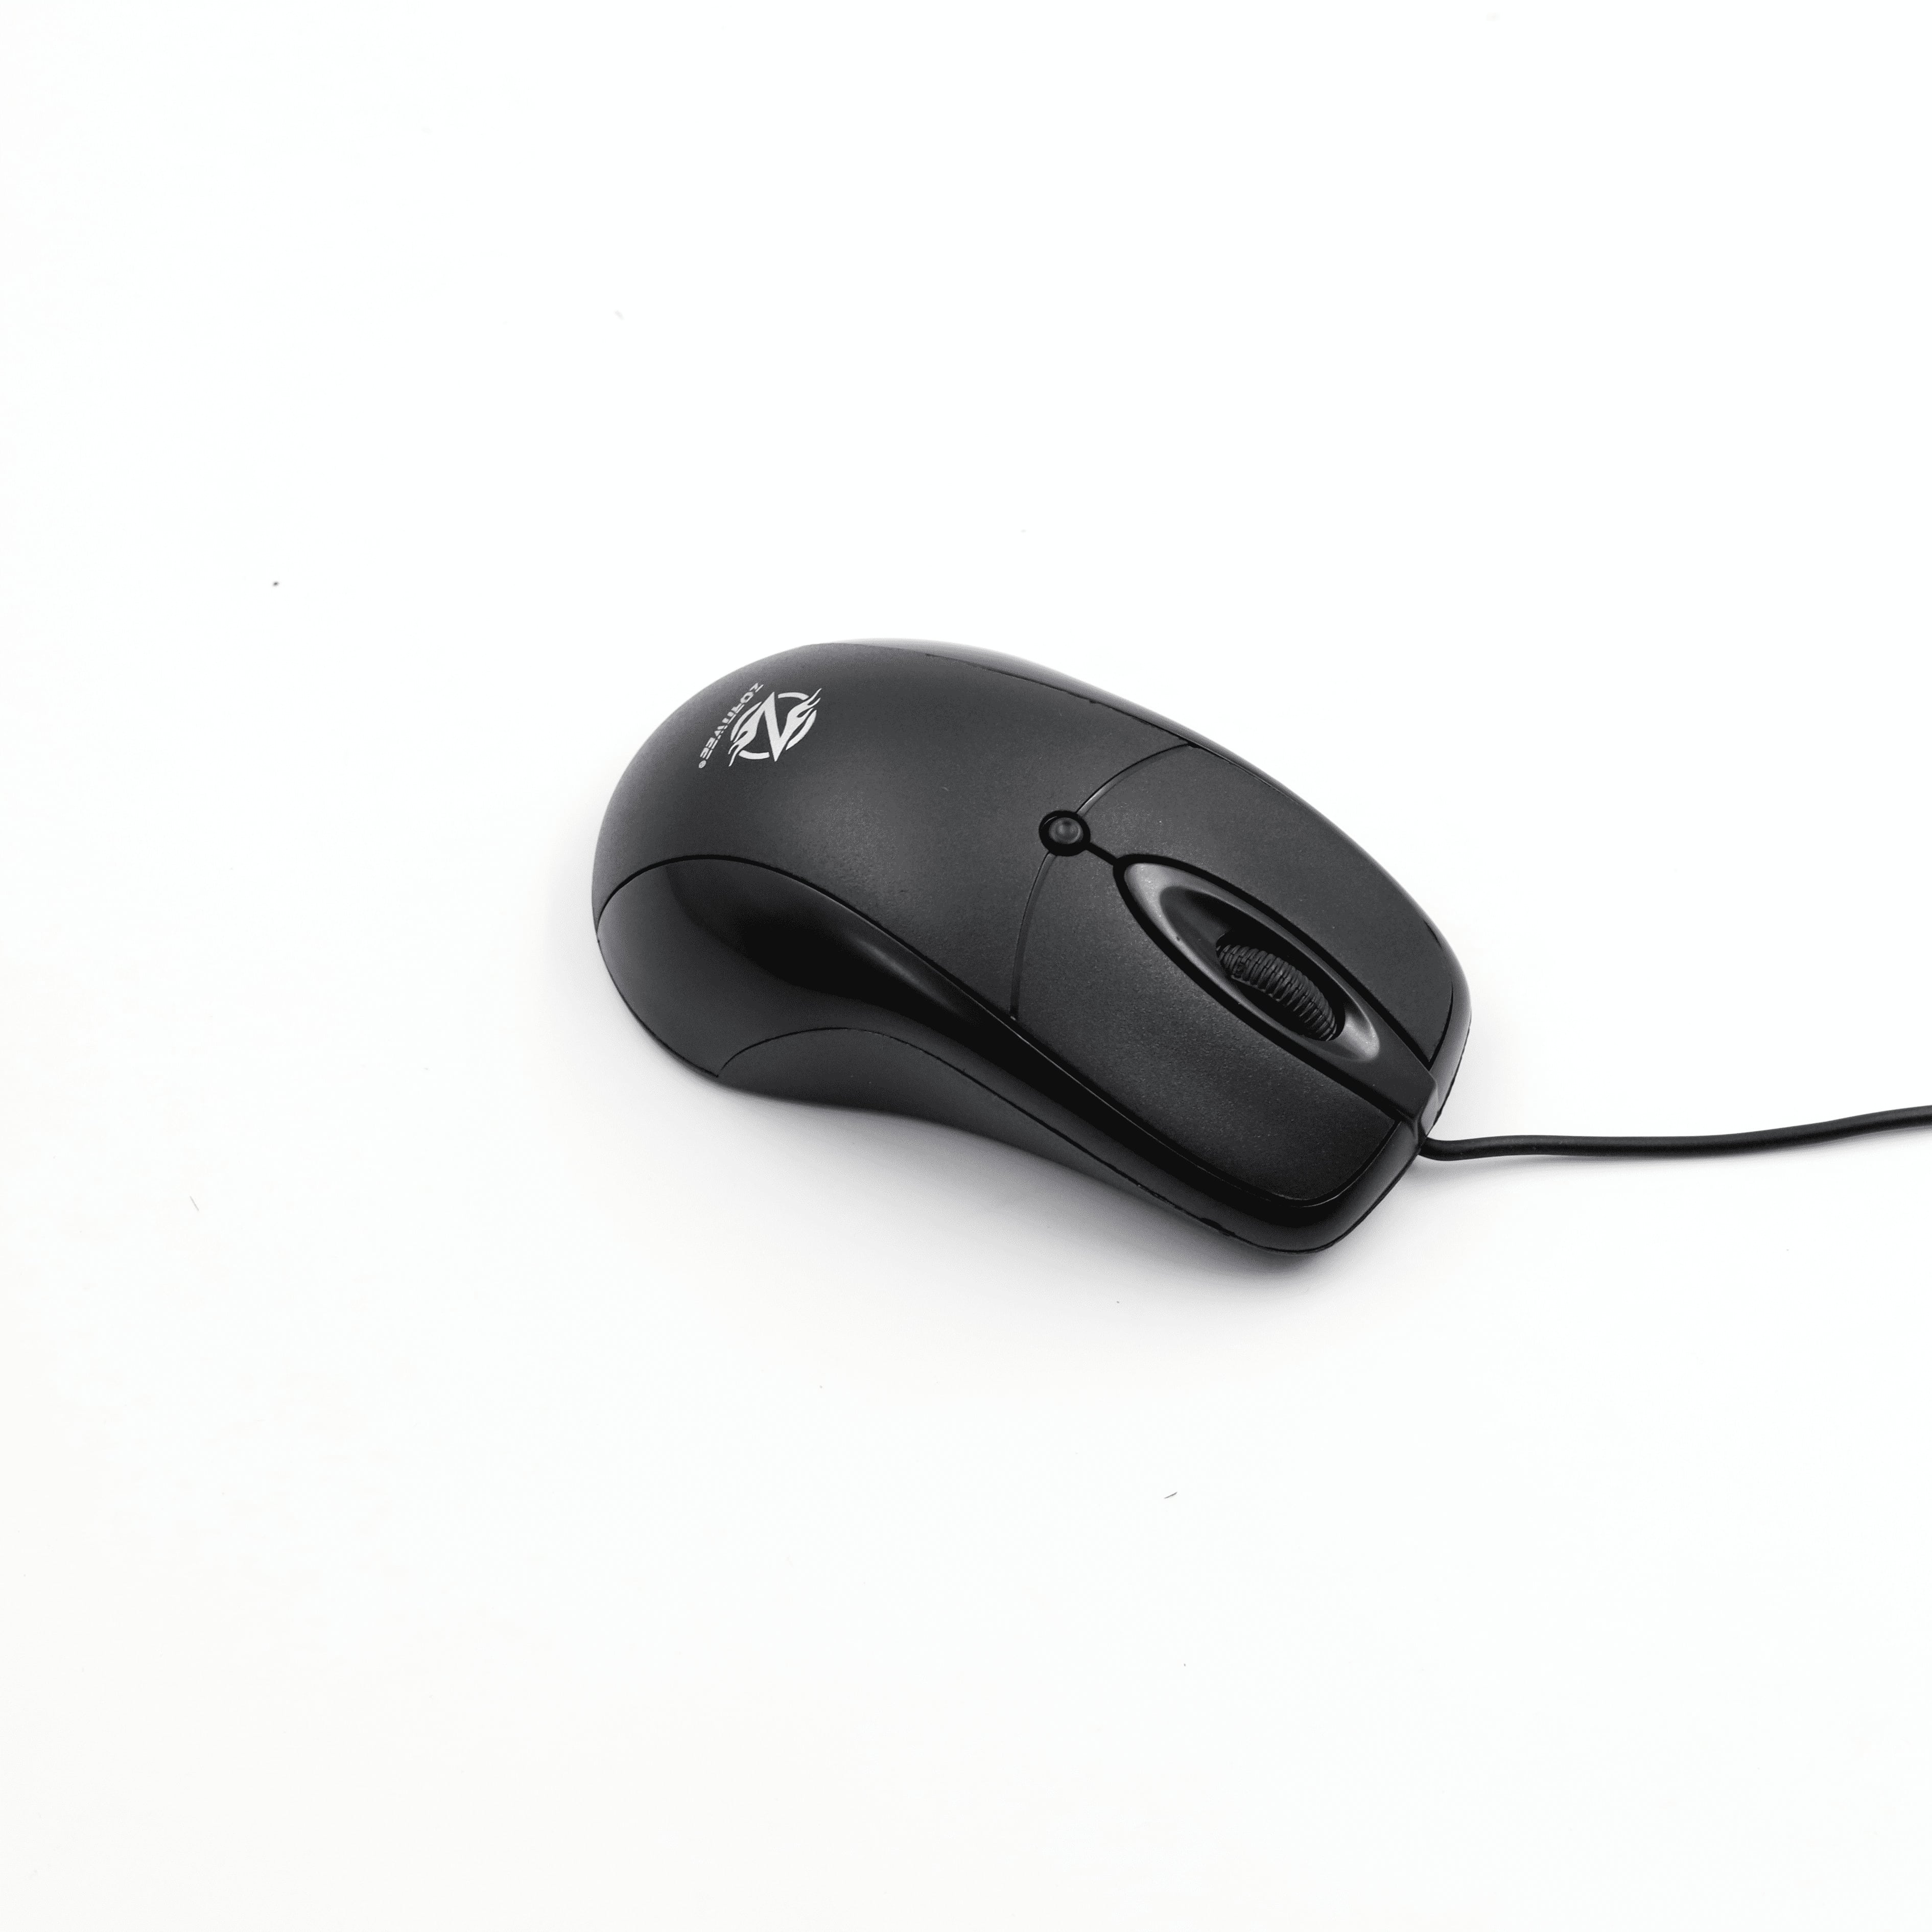 MOUSE ZORNWEE G628 COMFORTABLE USB ,Mouse